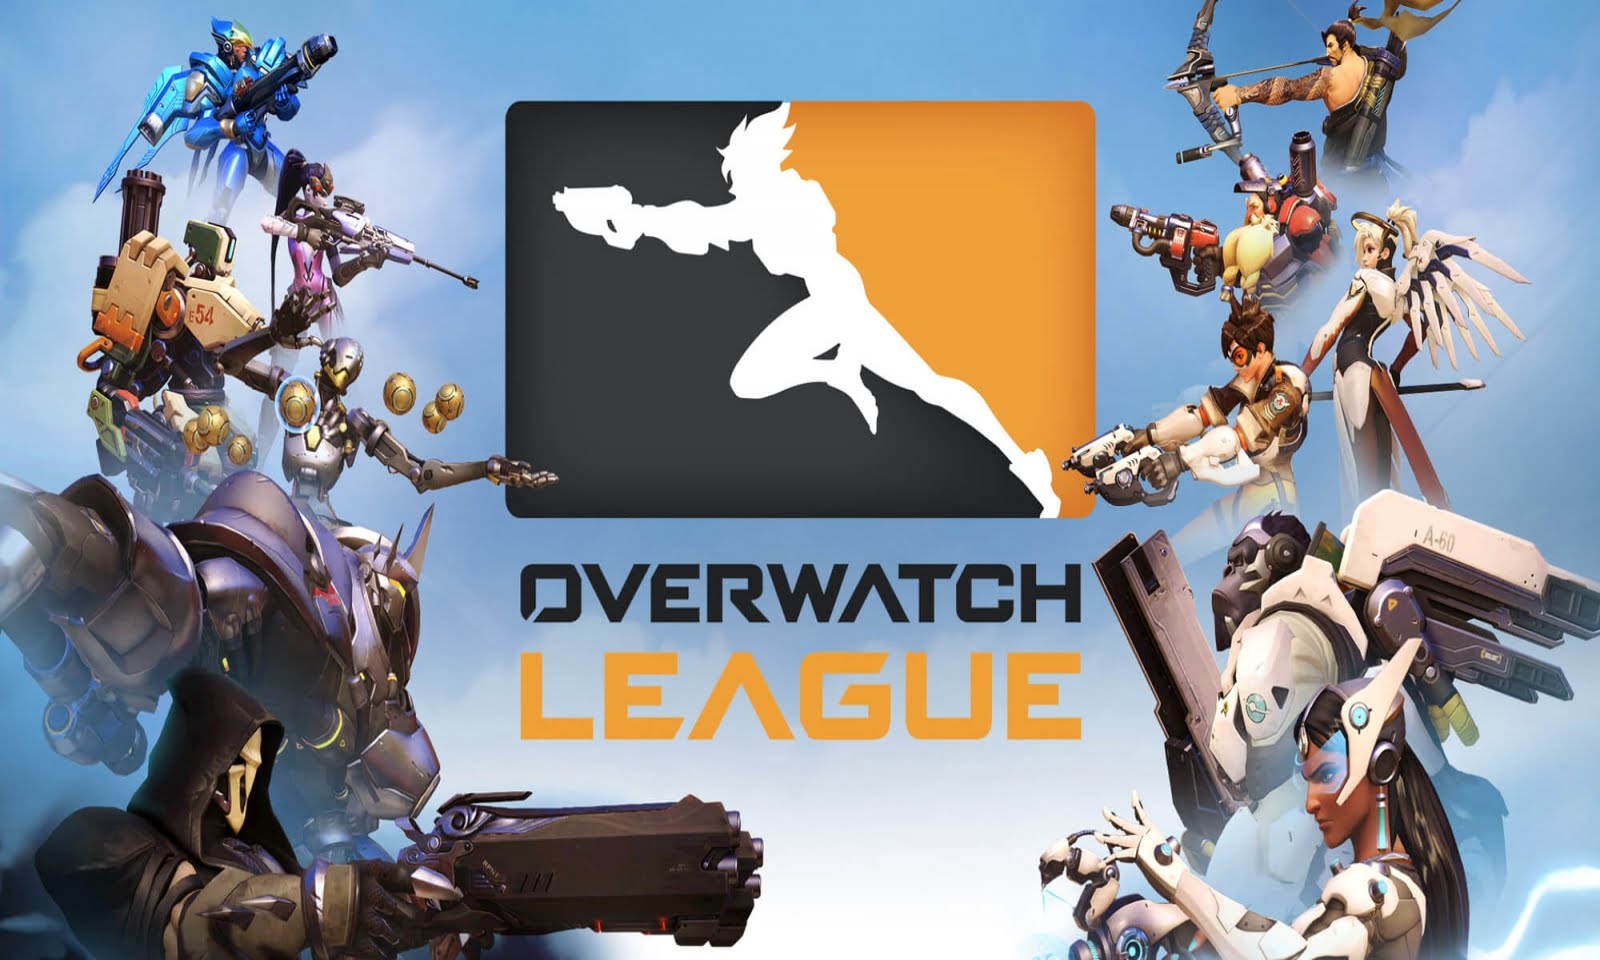 HP and Intel to Sponsor Blizzard’s Overwatch League